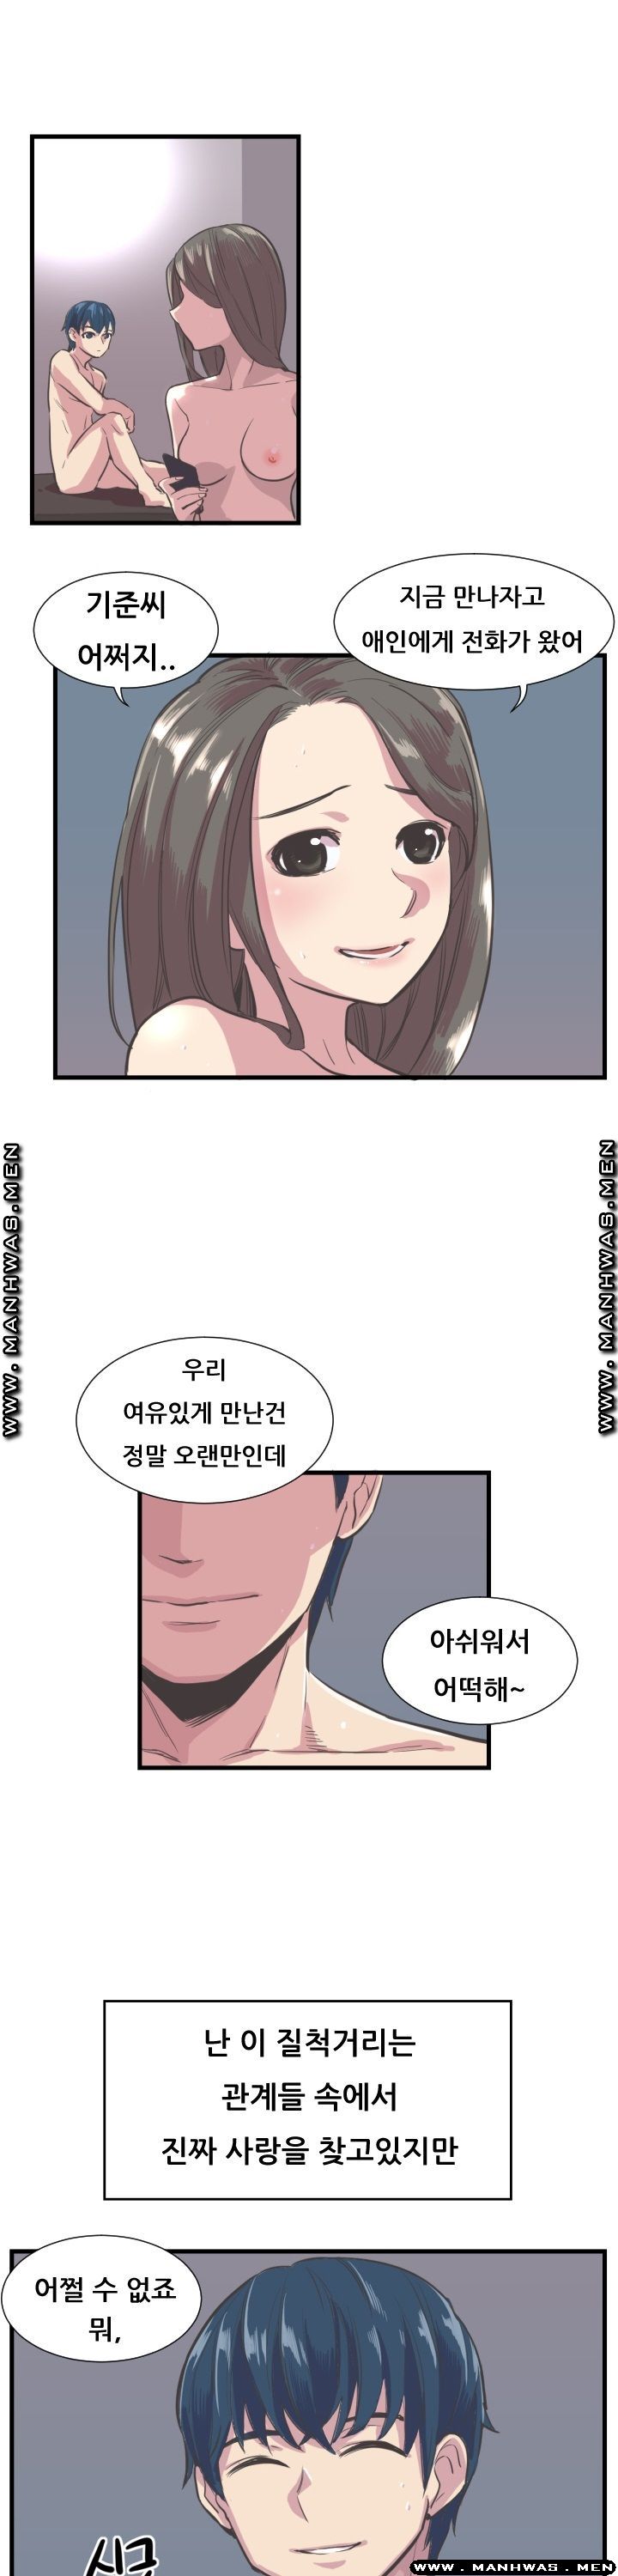 Innocent Man and Women Raw - Chapter 2 Page 20